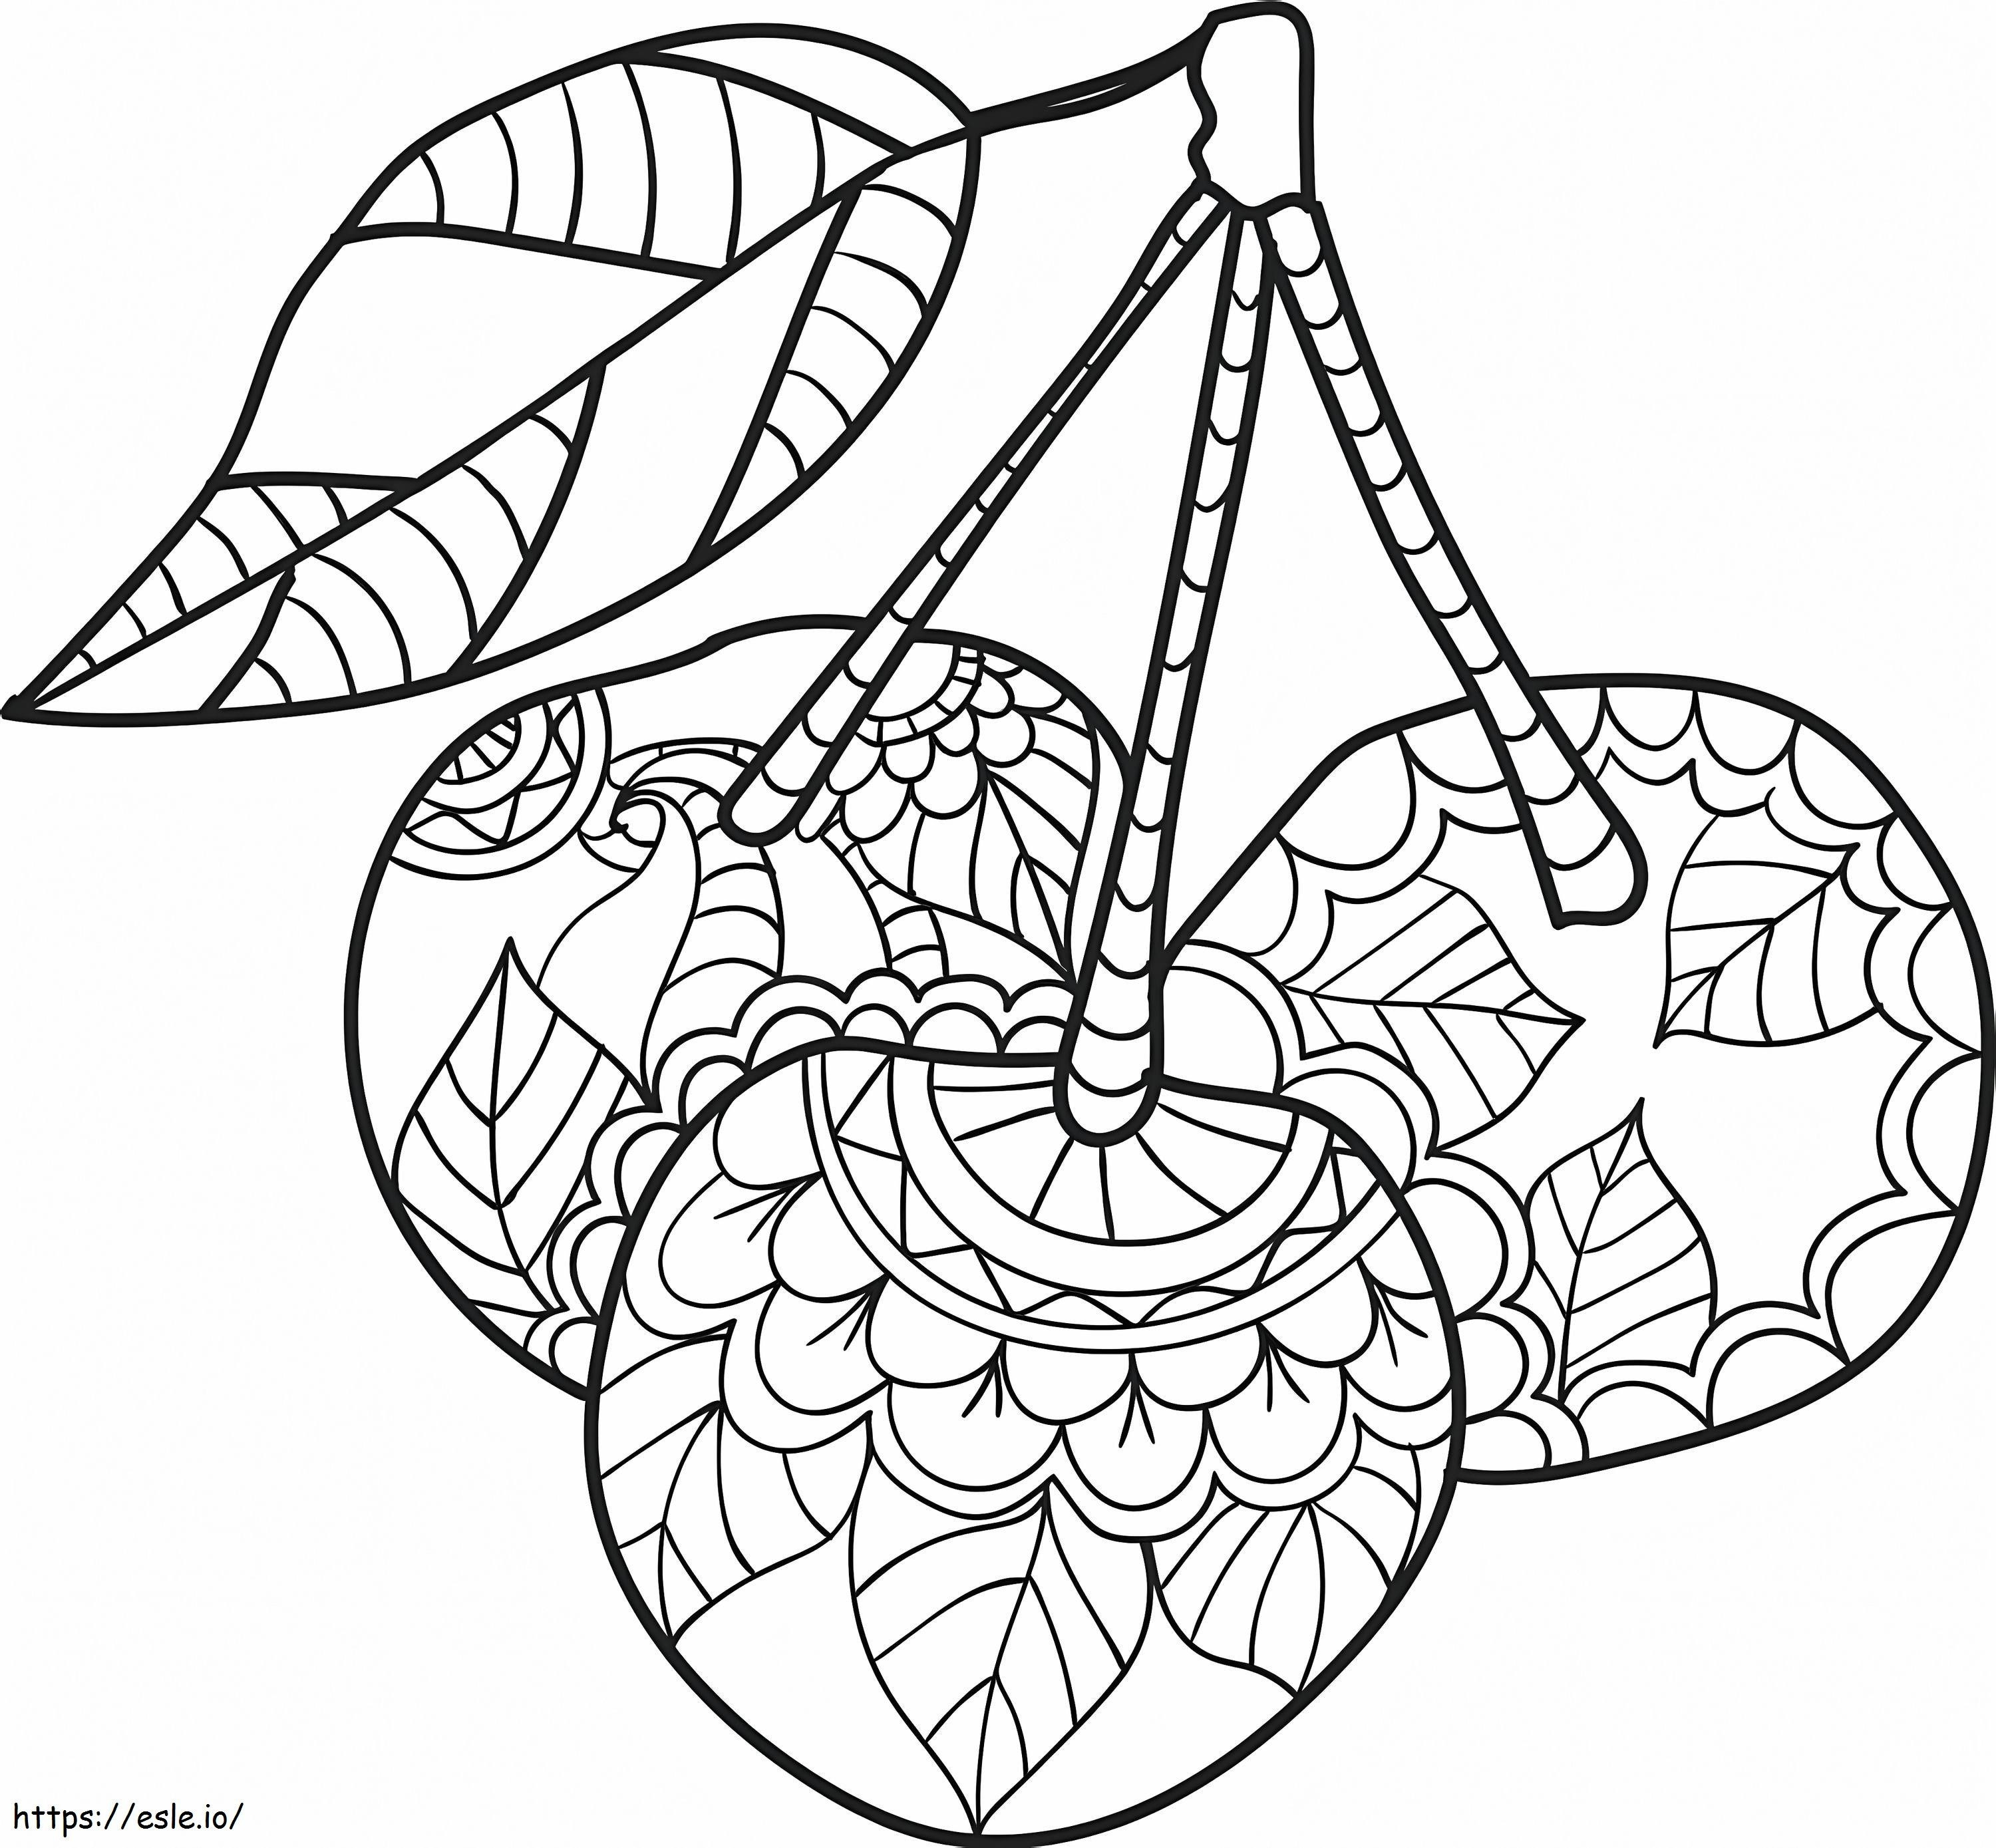 Cherry Is For Adults coloring page